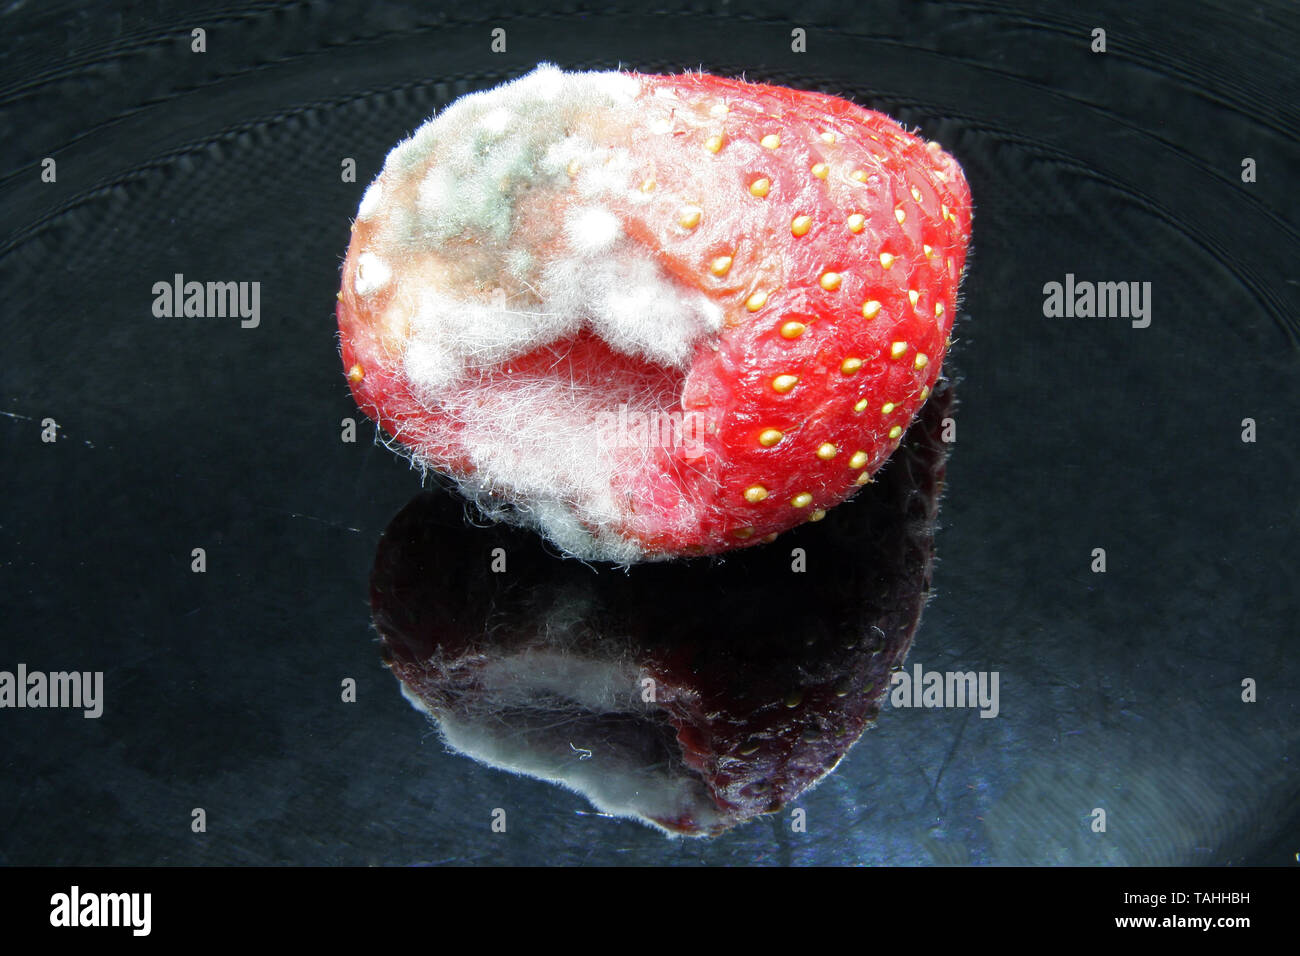 Strawberries with mold. Bad fruit. Bad strawberries. Stock Photo